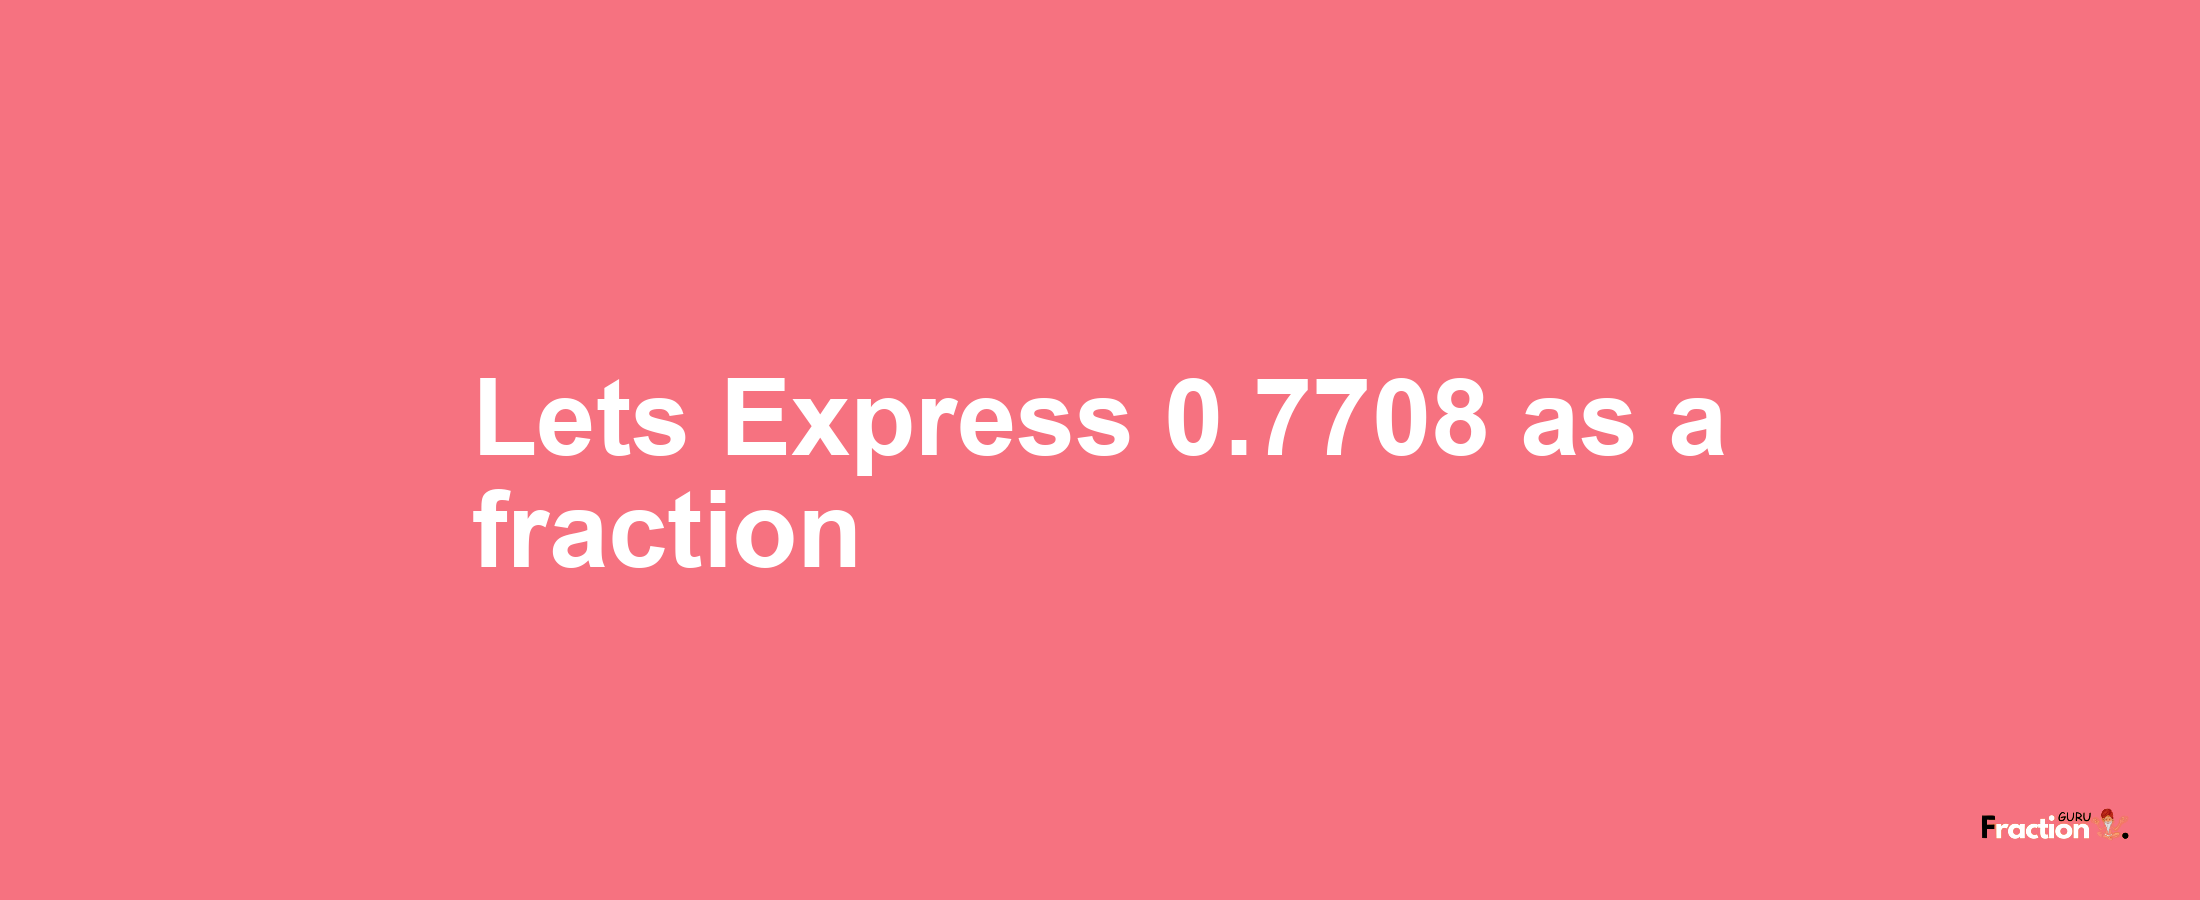 Lets Express 0.7708 as afraction